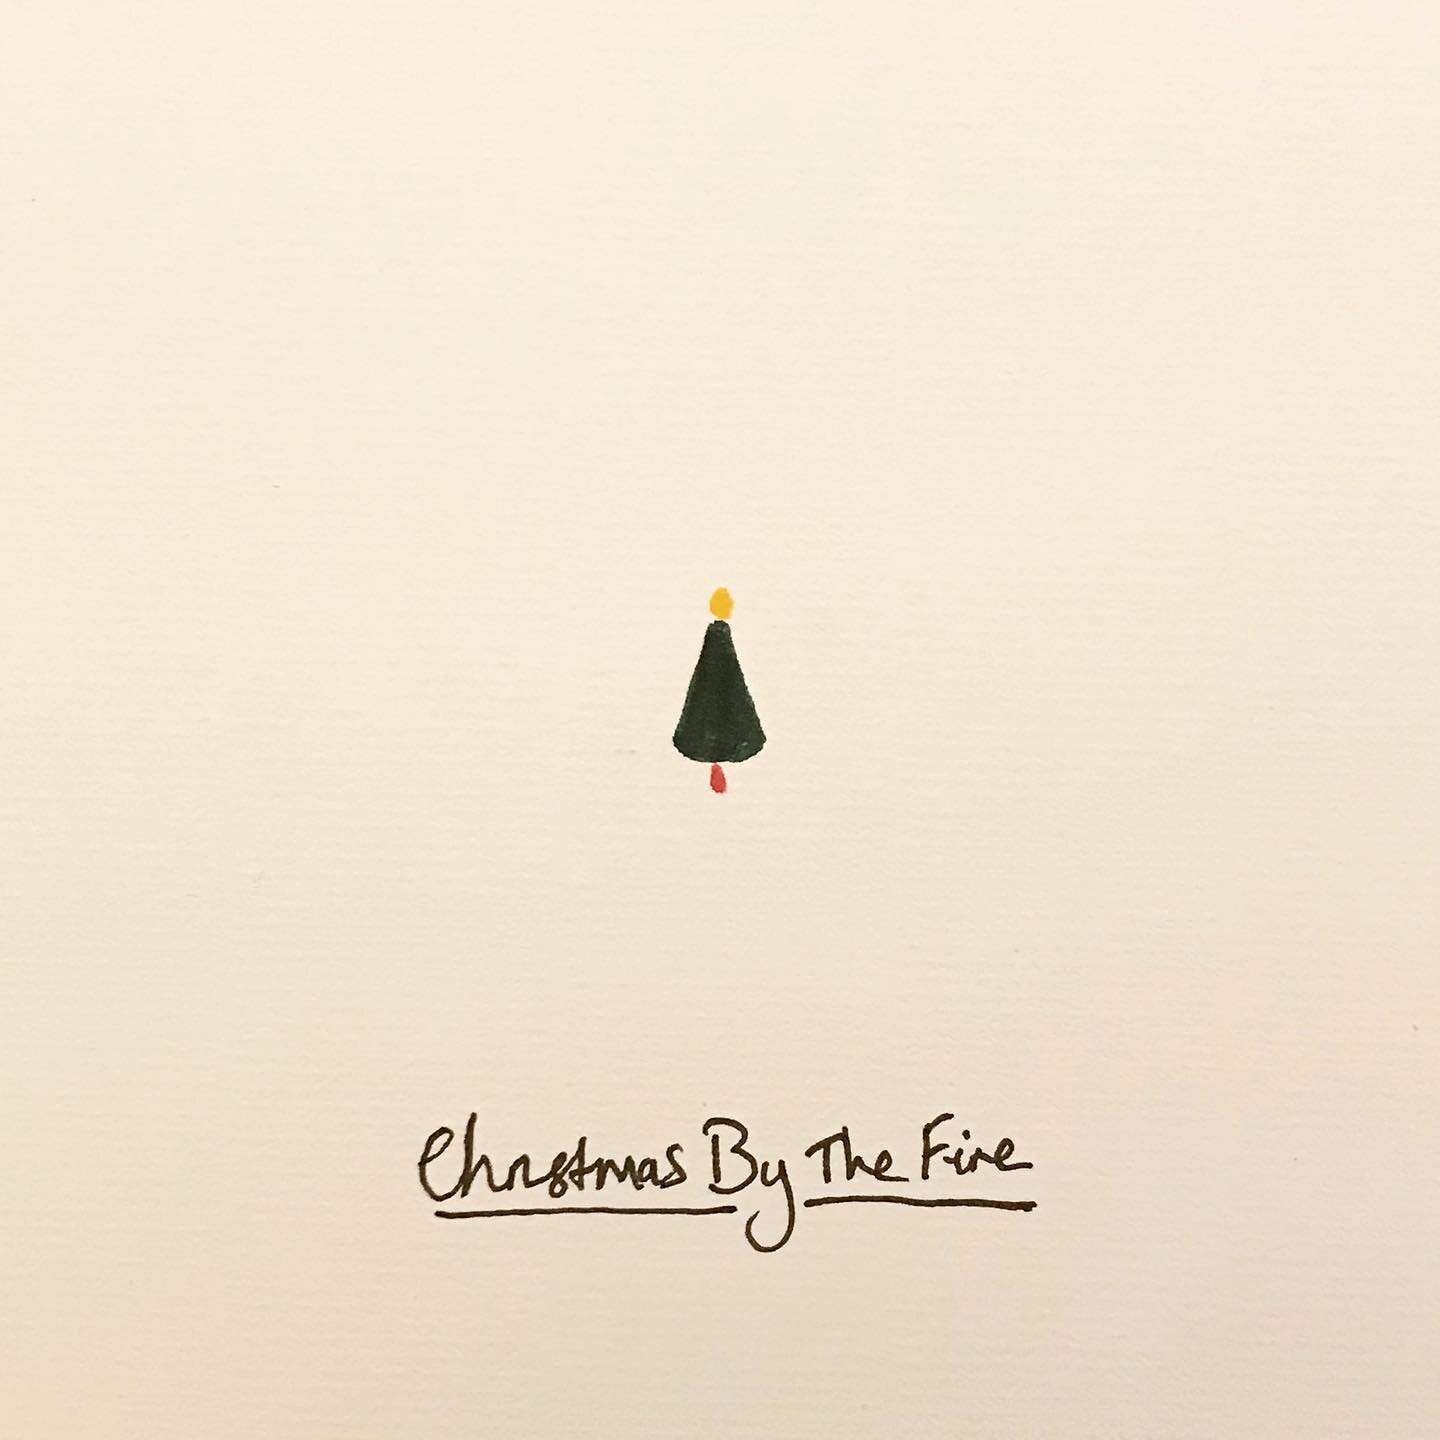 Our little Christmas album is 4 years old this year. Give it a spin for some premium cheer. 
Find on SoundCloud: https://on.soundcloud.com/BazD5UB9wCGNCi1D8